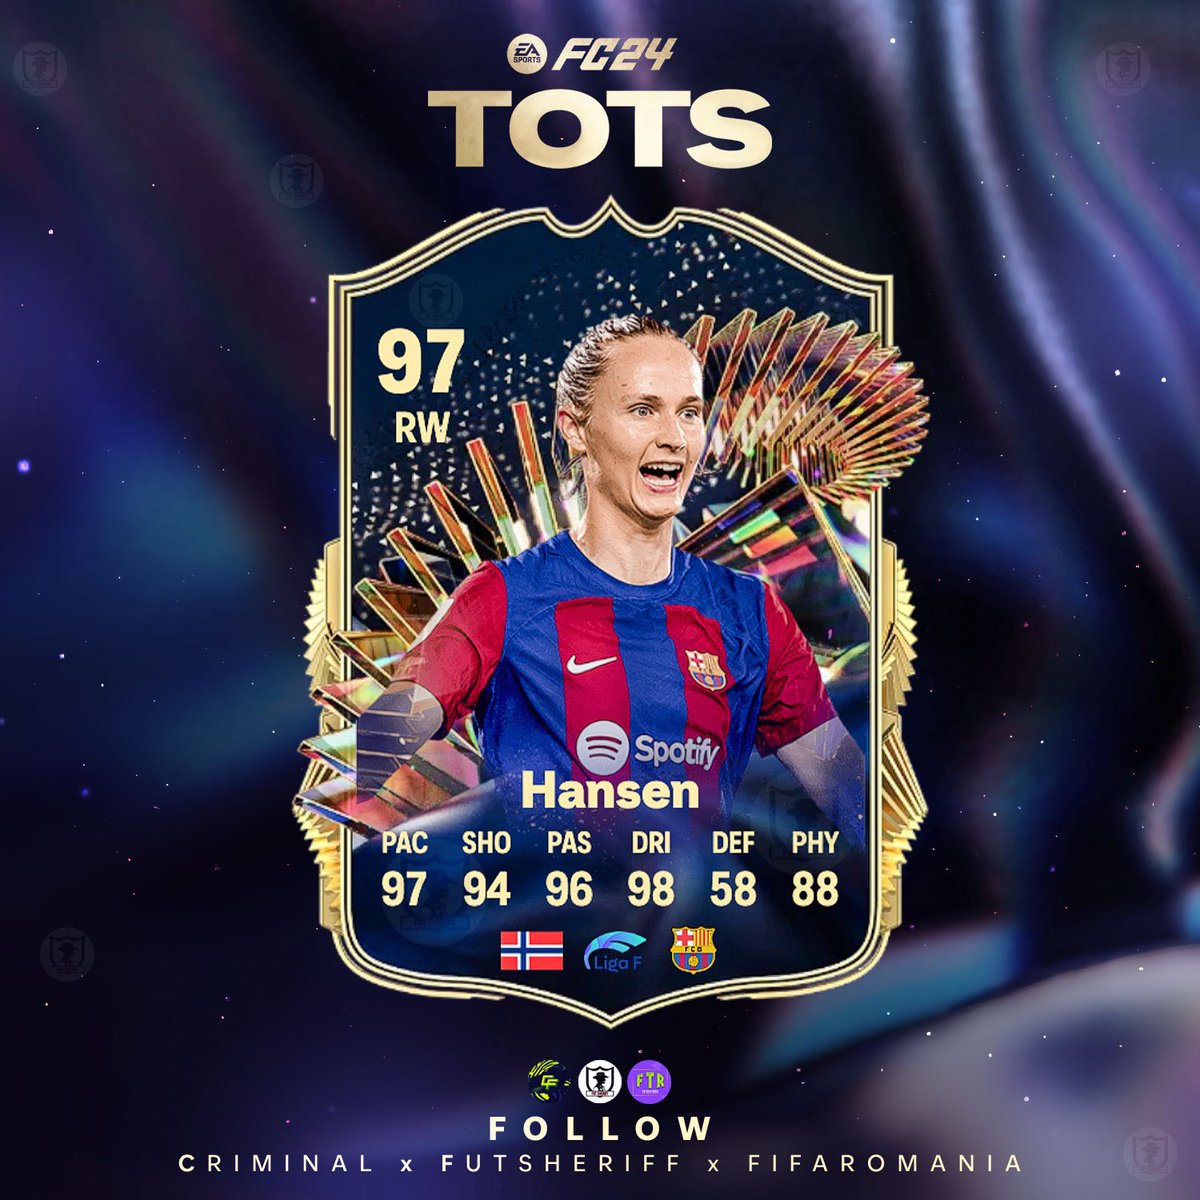 🚨Hansen🇳🇴 is coming as LA LIGA TOTS soon!🔥 Stats are prediction ⭐️ Make sure to follow @FutSheriff @fifa_romania and unfollow @Criminal__x cause he is lazy! #fc24